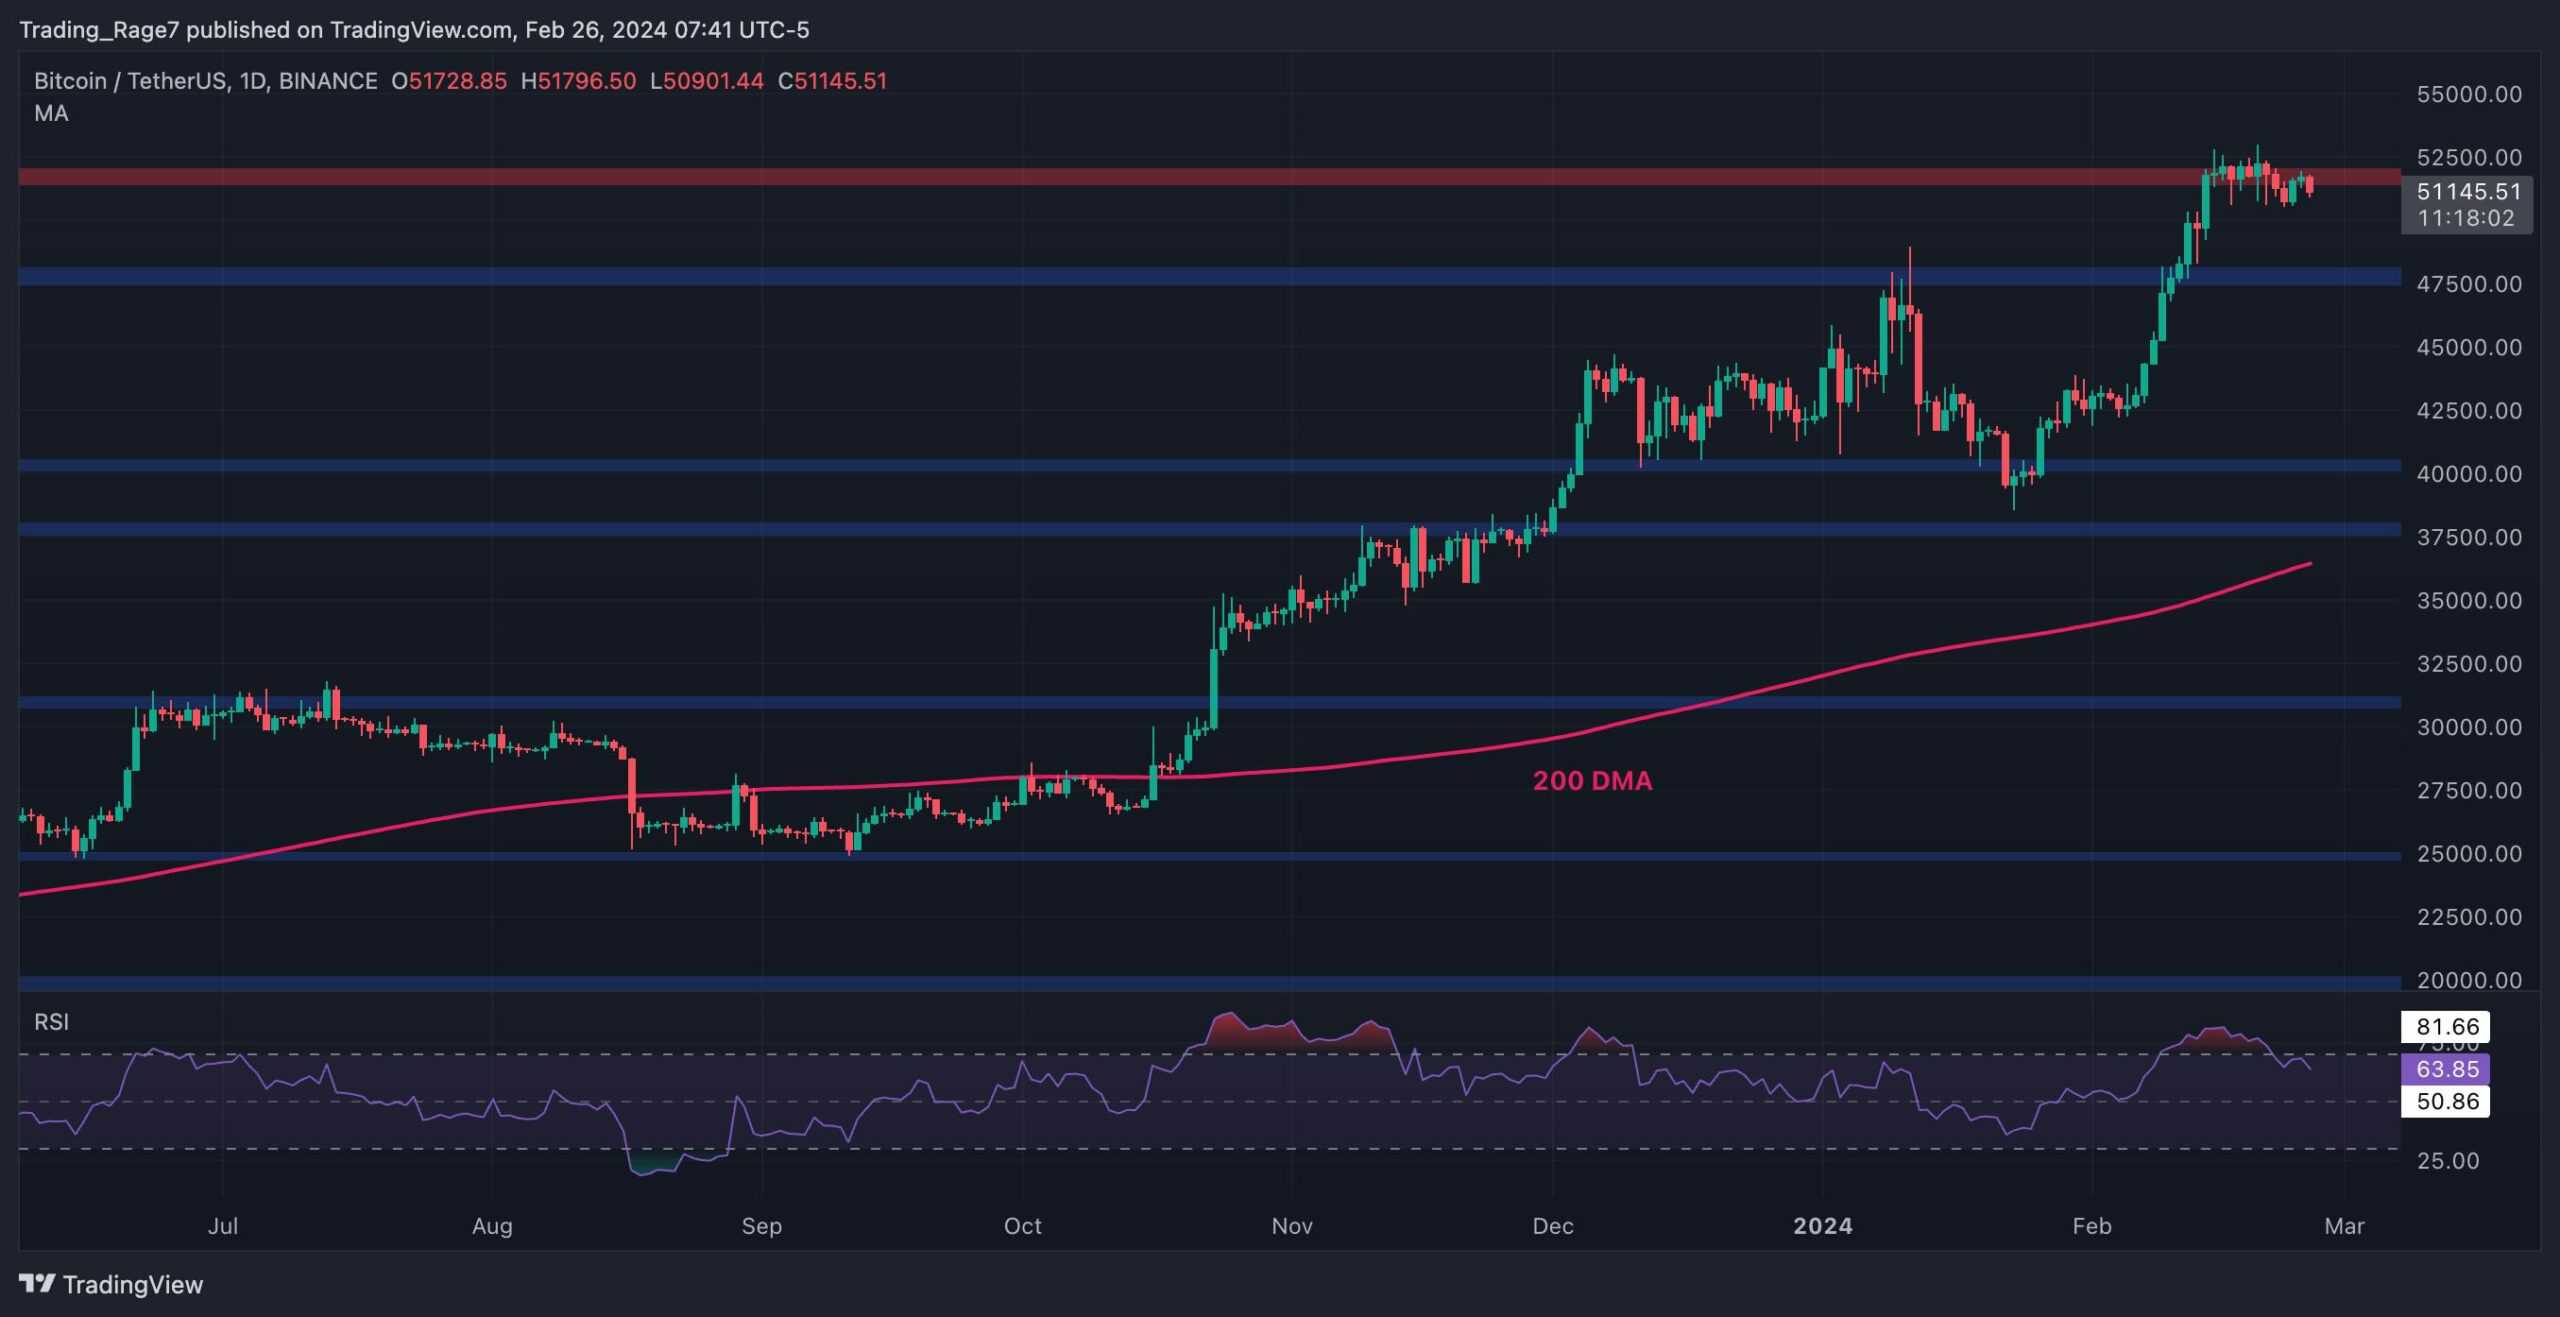 BTC Dropping to $48K or Pushing to $55K: Which One Comes First? (Bitcoin Price Analysis)